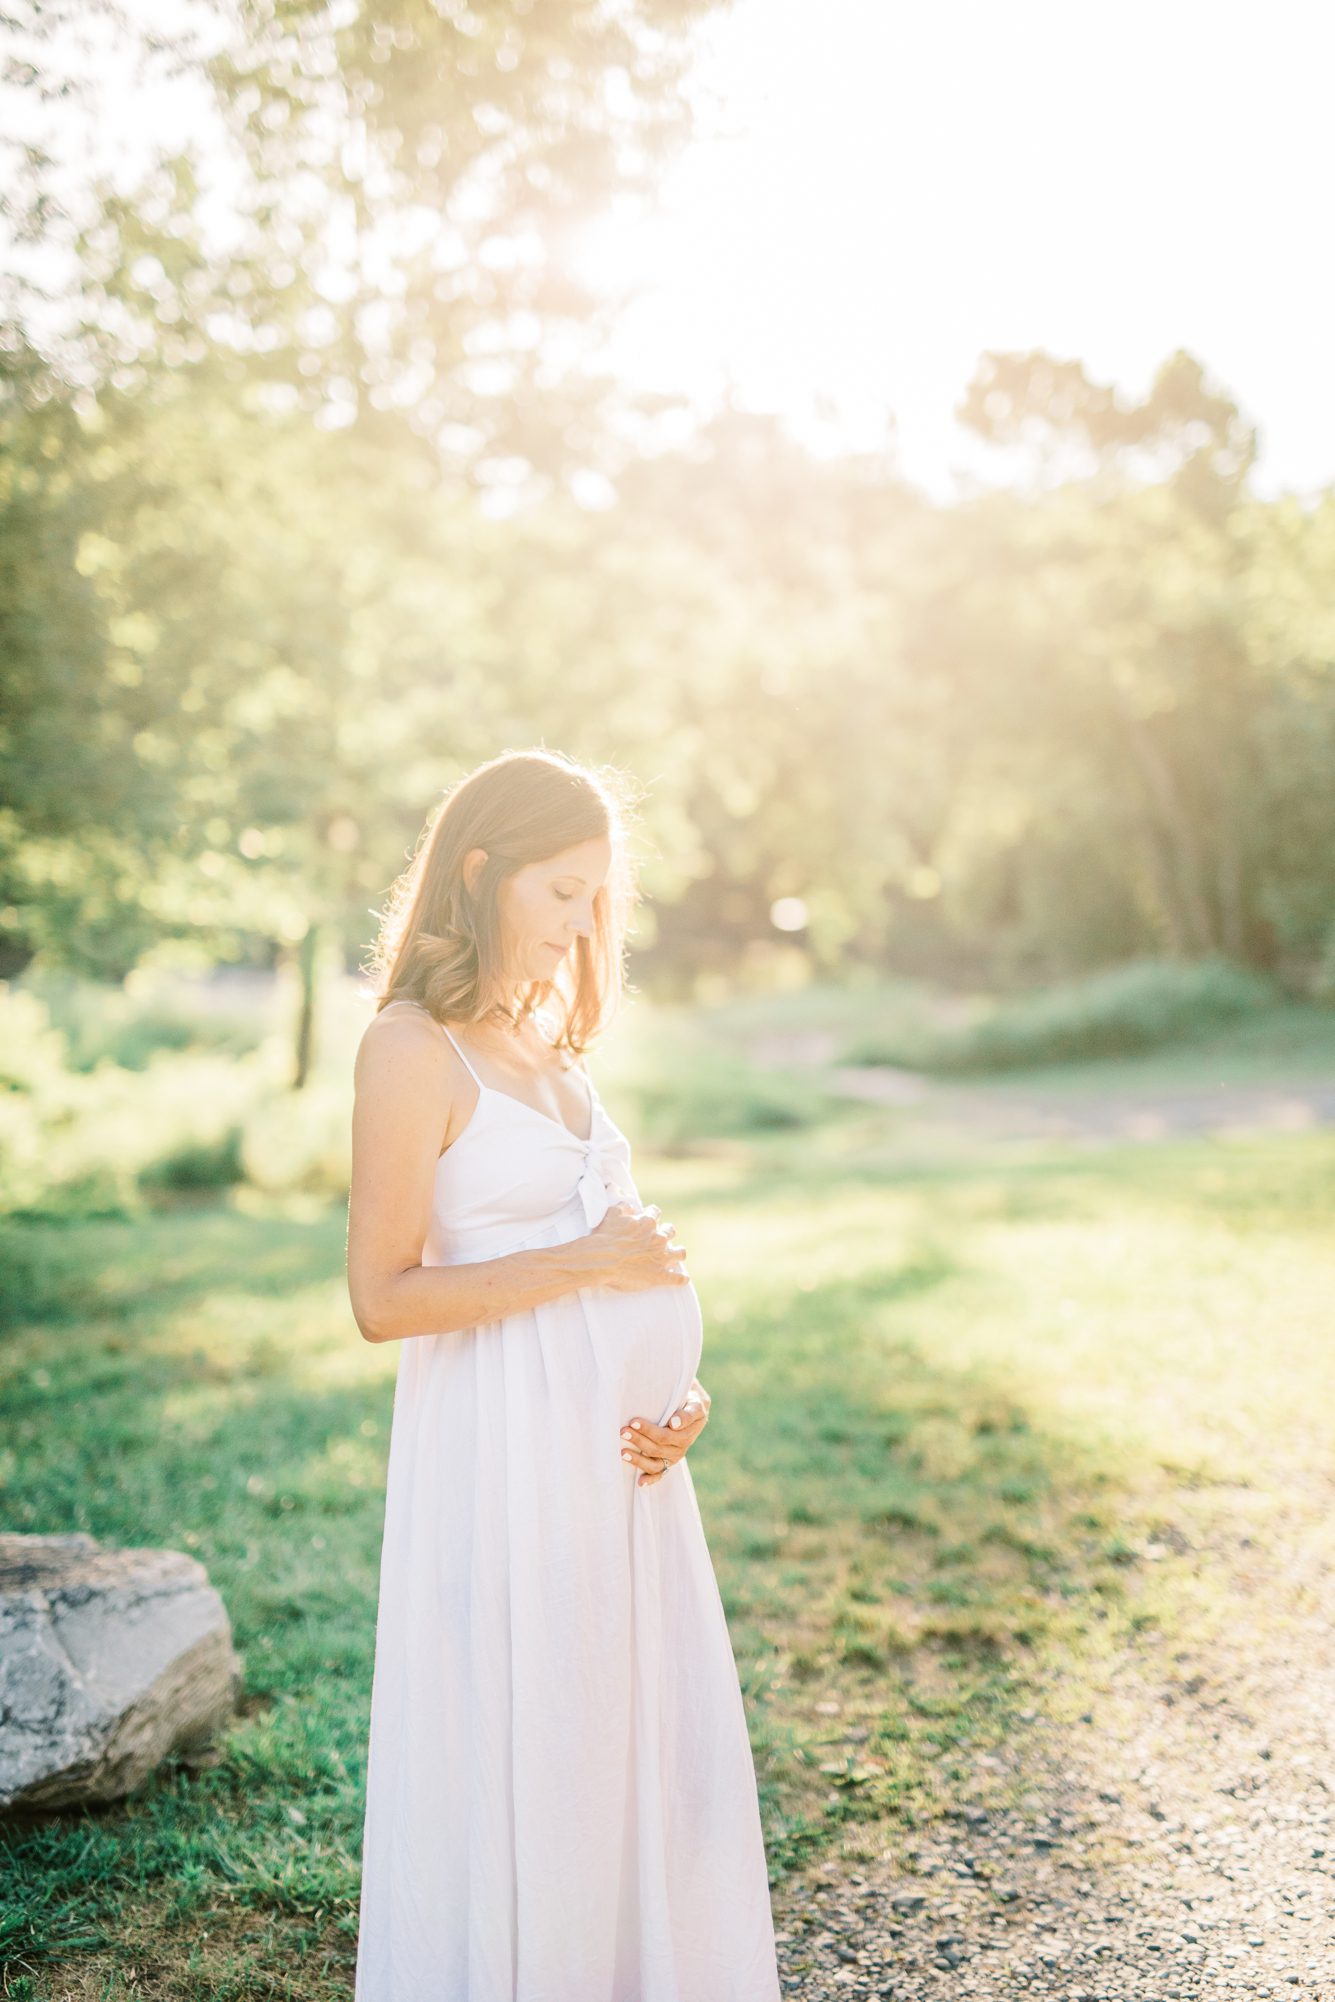 Sun-drenched image of pregnant mom with hands on her bump by Washington DC maternity photographer, LRG Portraits.